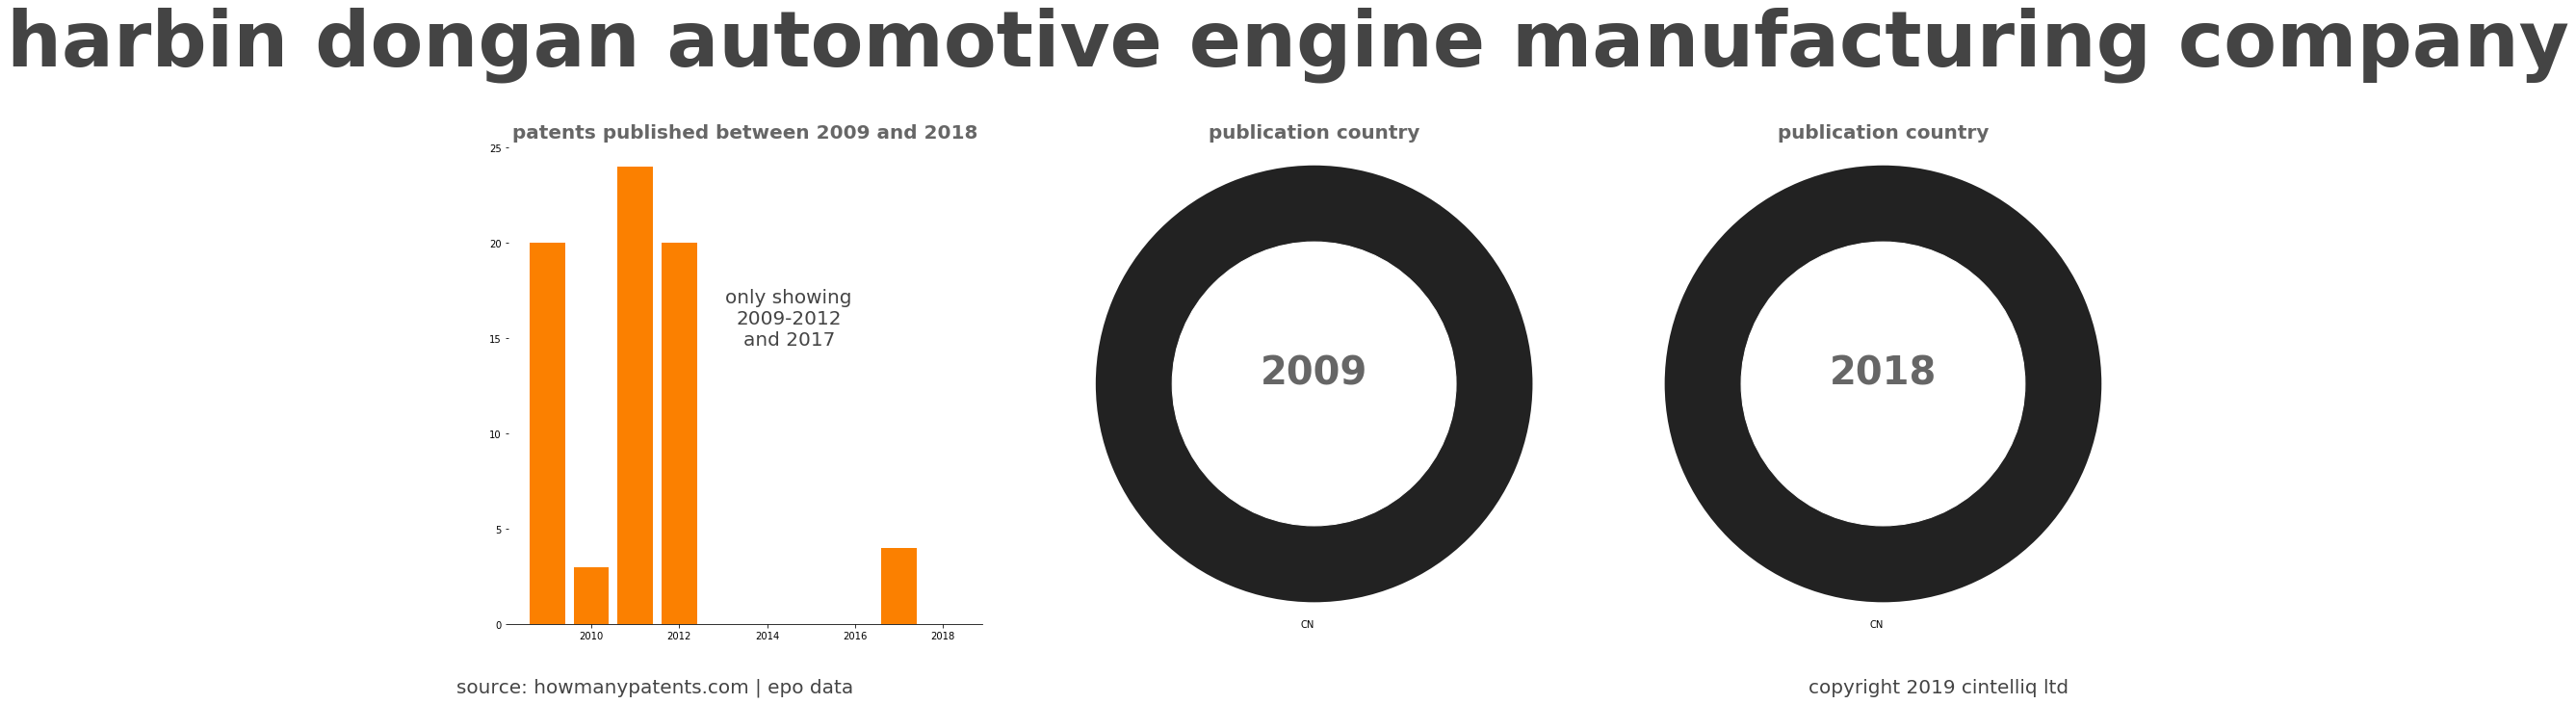 summary of patents for Harbin Dongan Automotive Engine Manufacturing Company